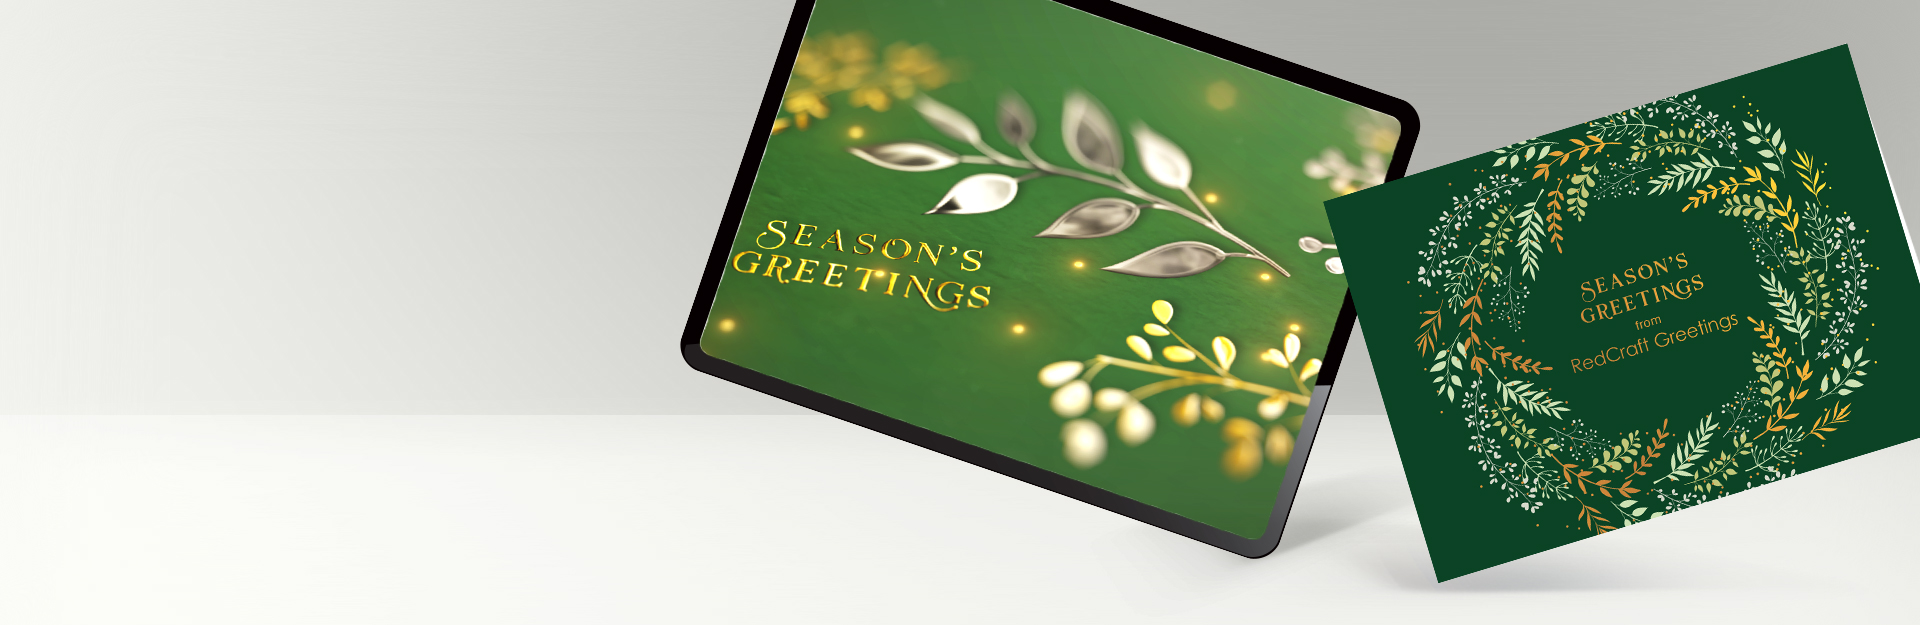 Electronic greeting cards customized for a brand with "font and colors" written across banner